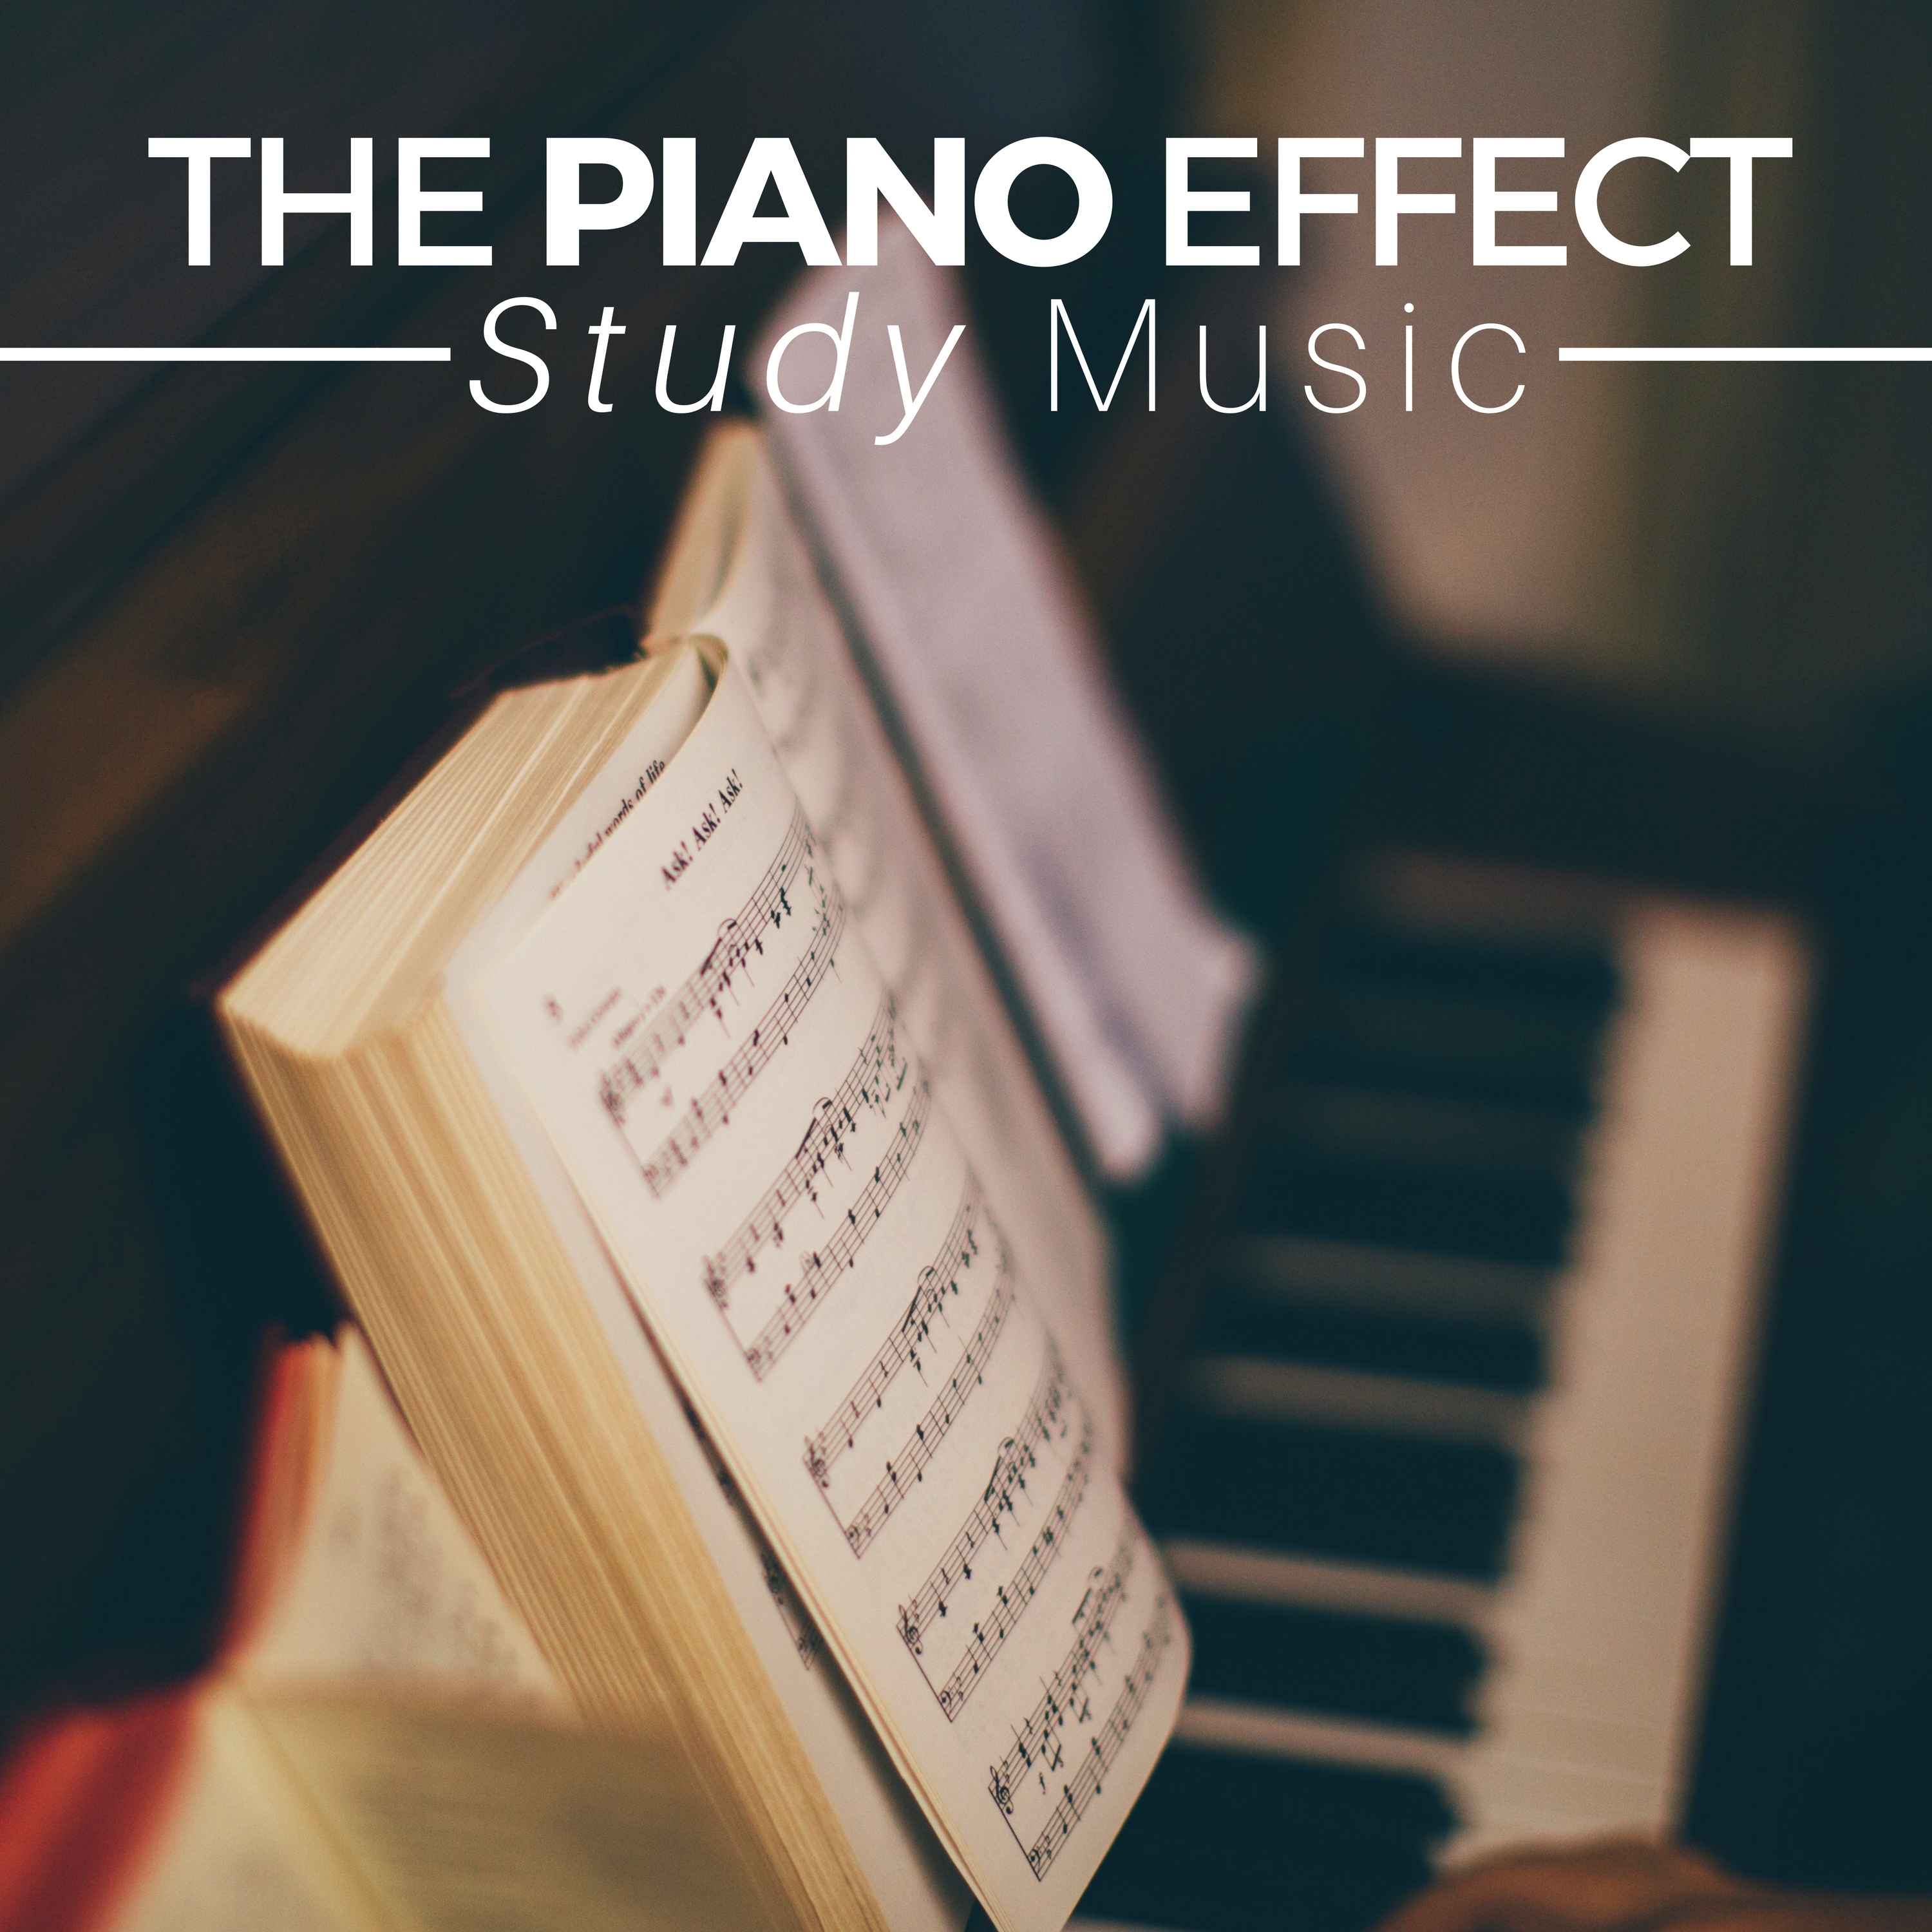 The Piano Effect - Study Music, Piano Songs for Concentration and Focus on Learning 2018